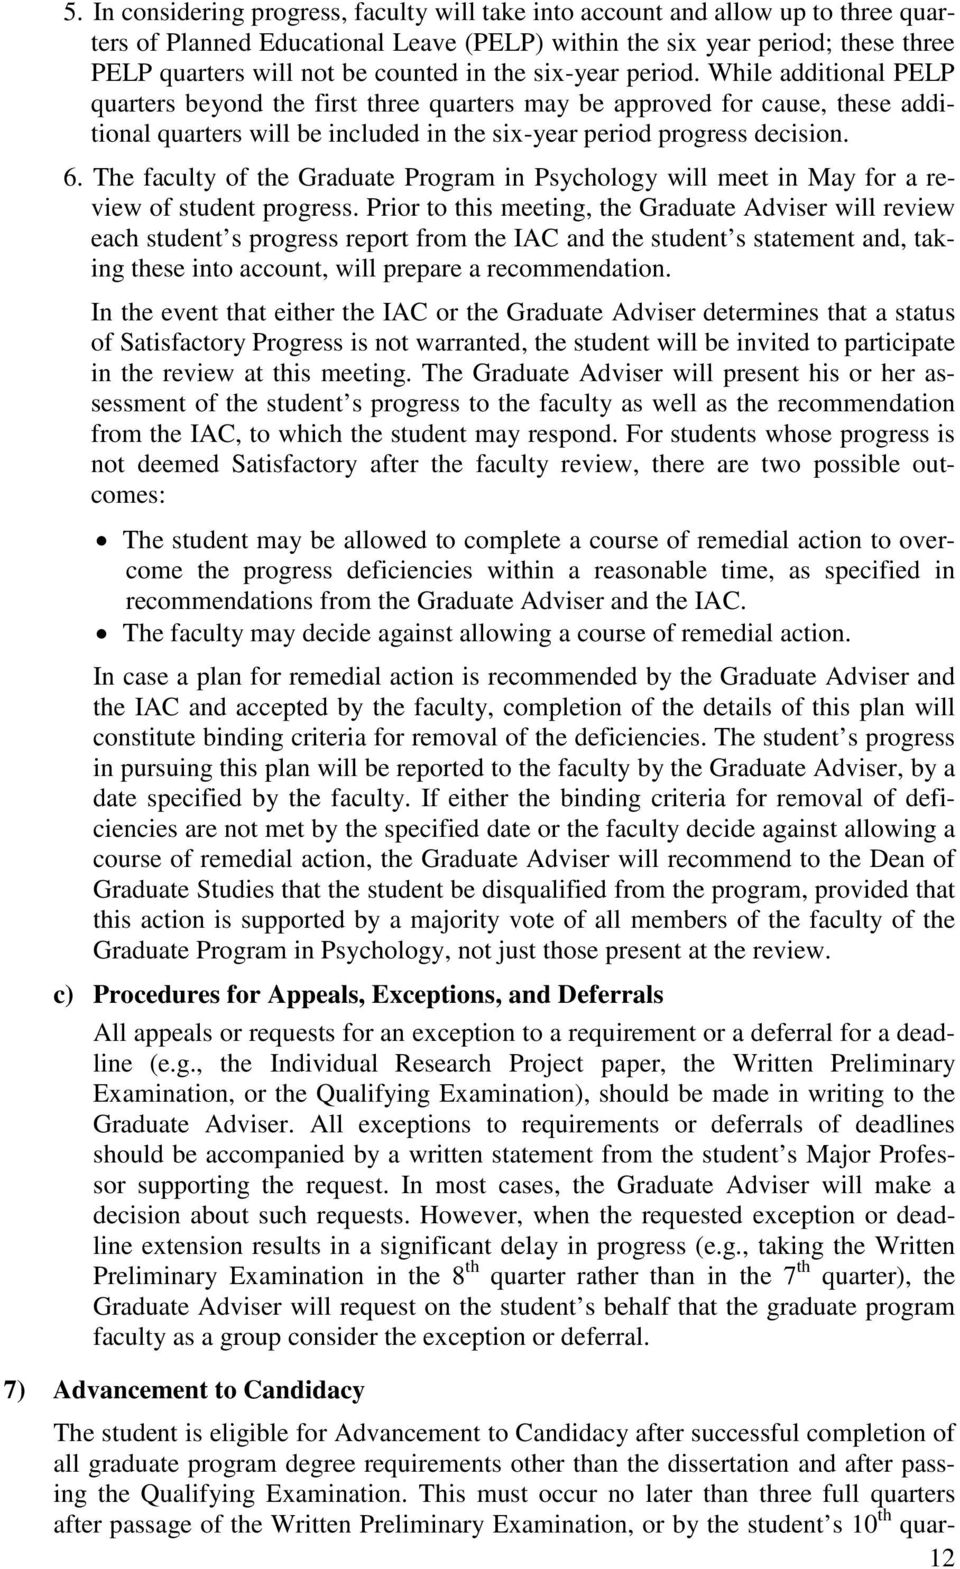 6. The faculty of the Graduate Program in Psychology will meet in May for a review of student progress.